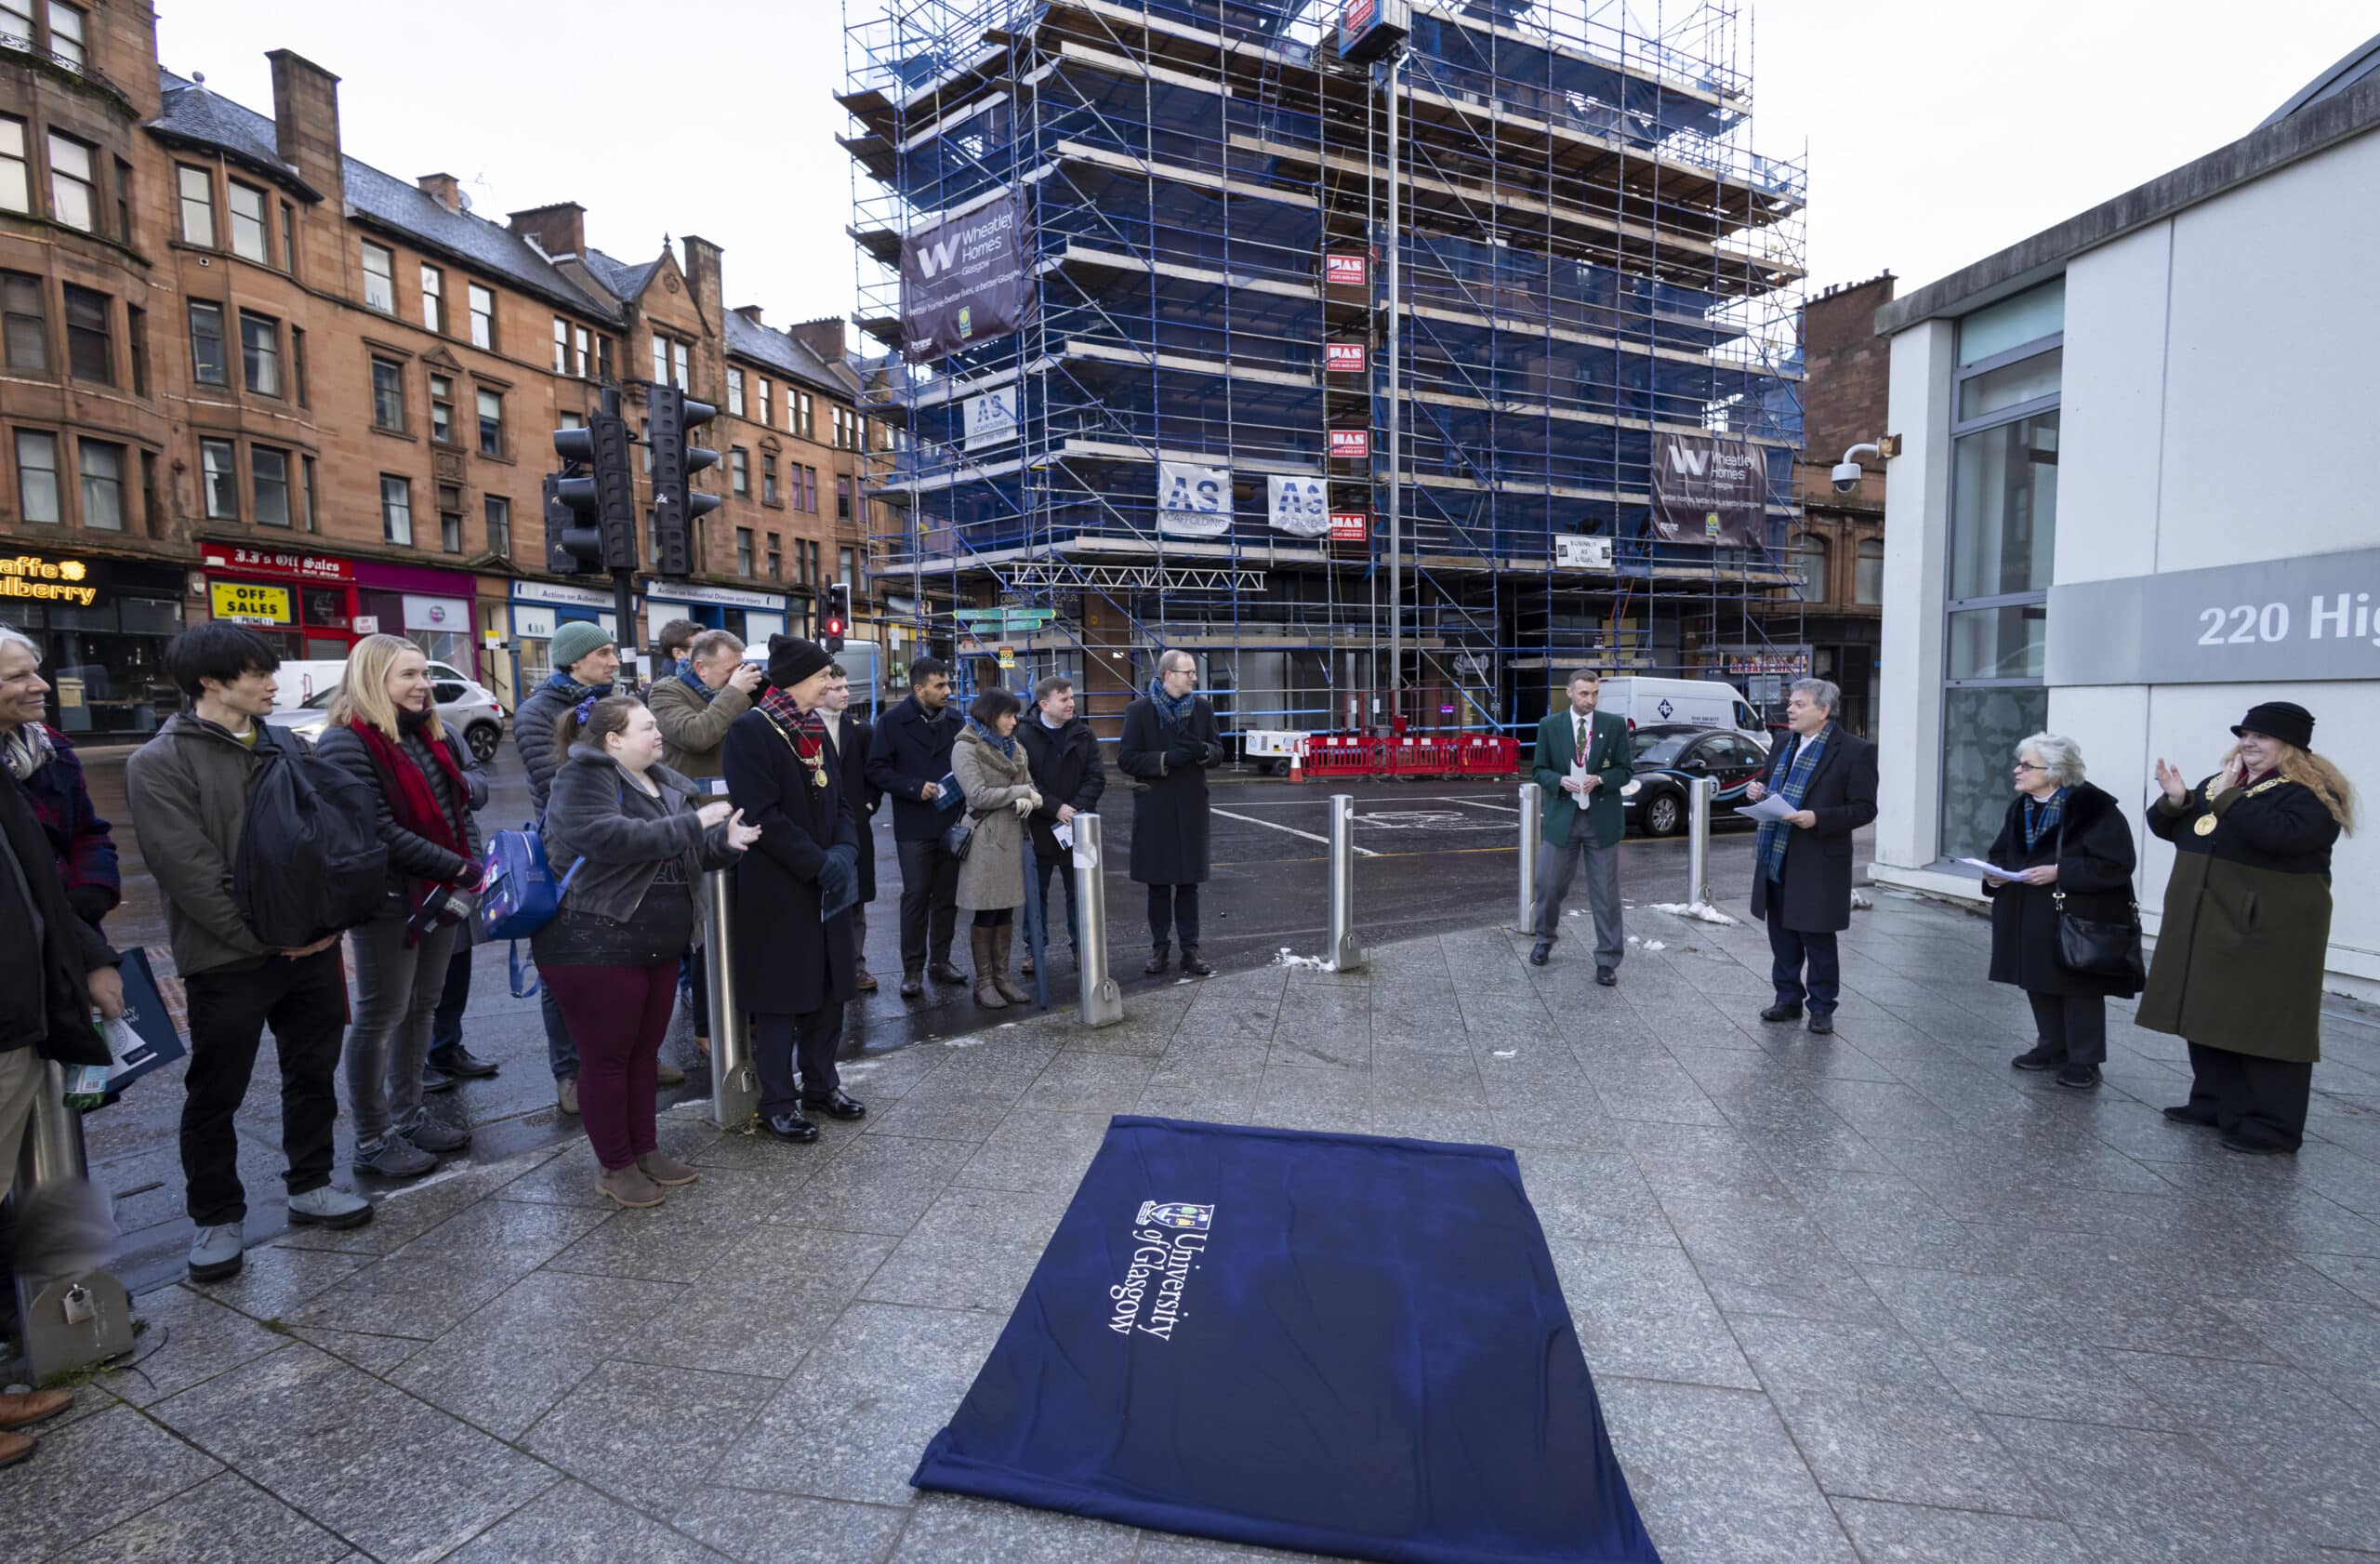 Lord Dean attends unveiling of memorial to economist Adam Smith